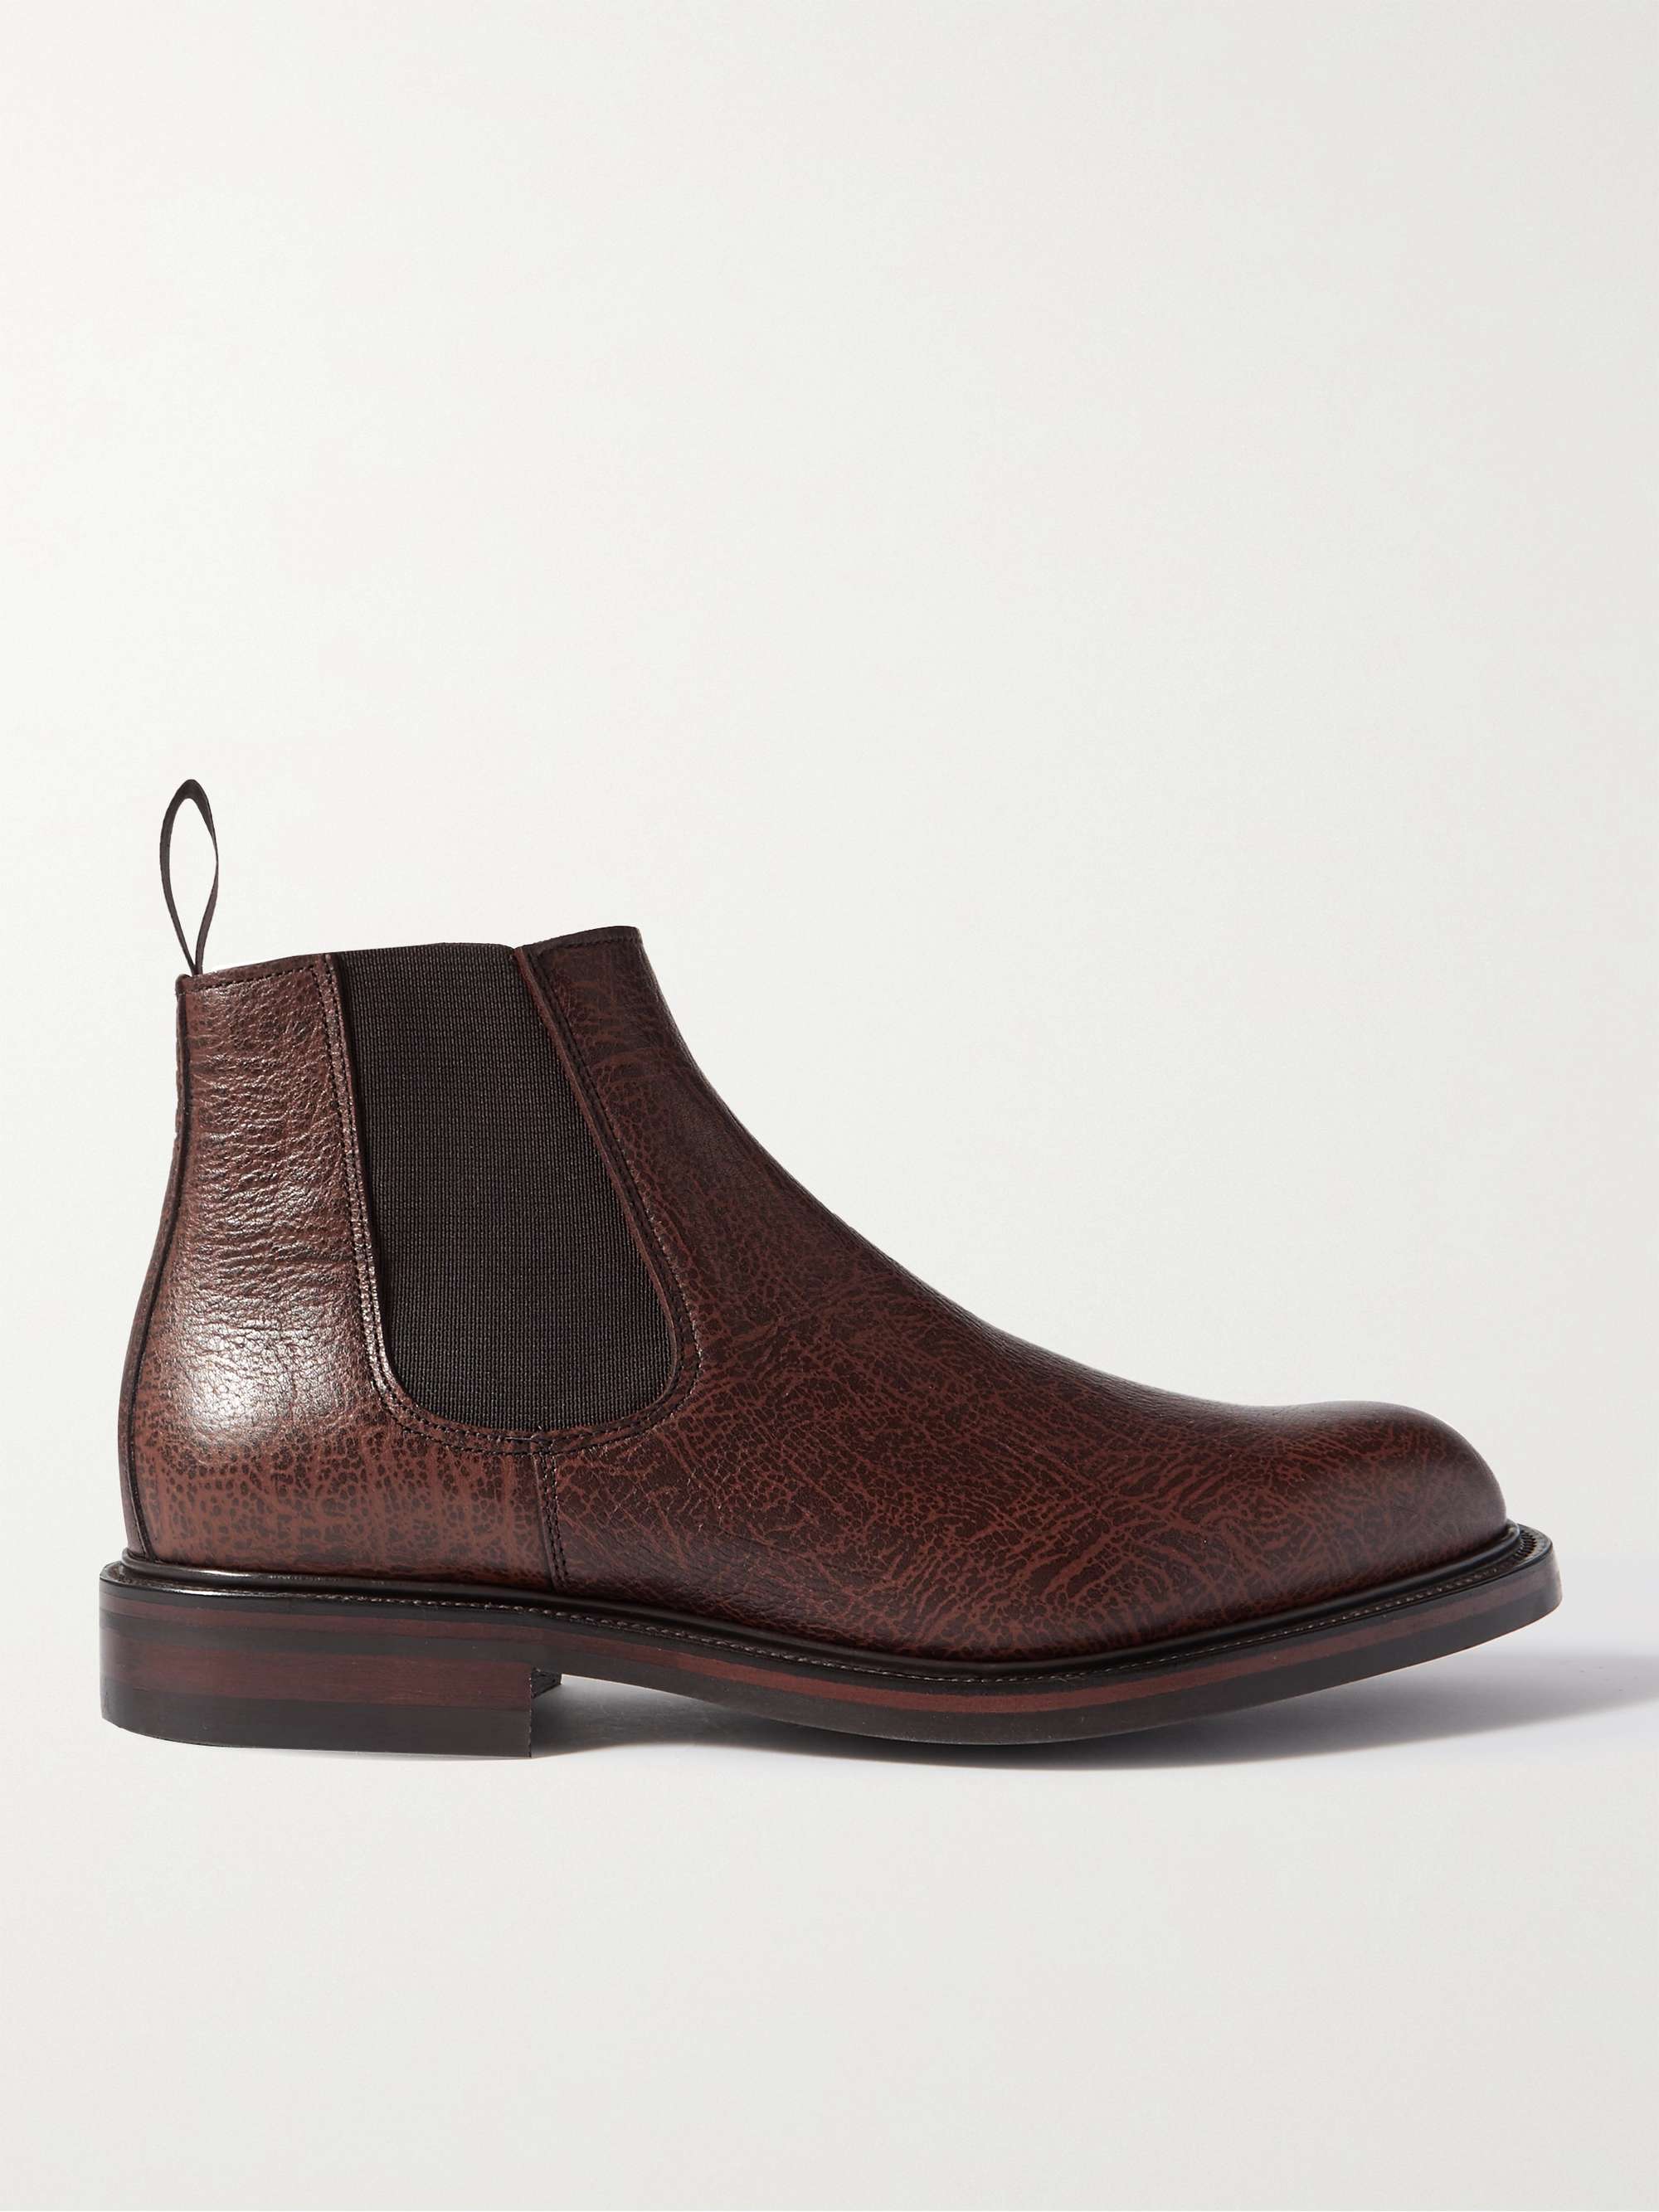 GEORGE CLEVERLEY Jason Full-Grain Suede Chelsea Boots